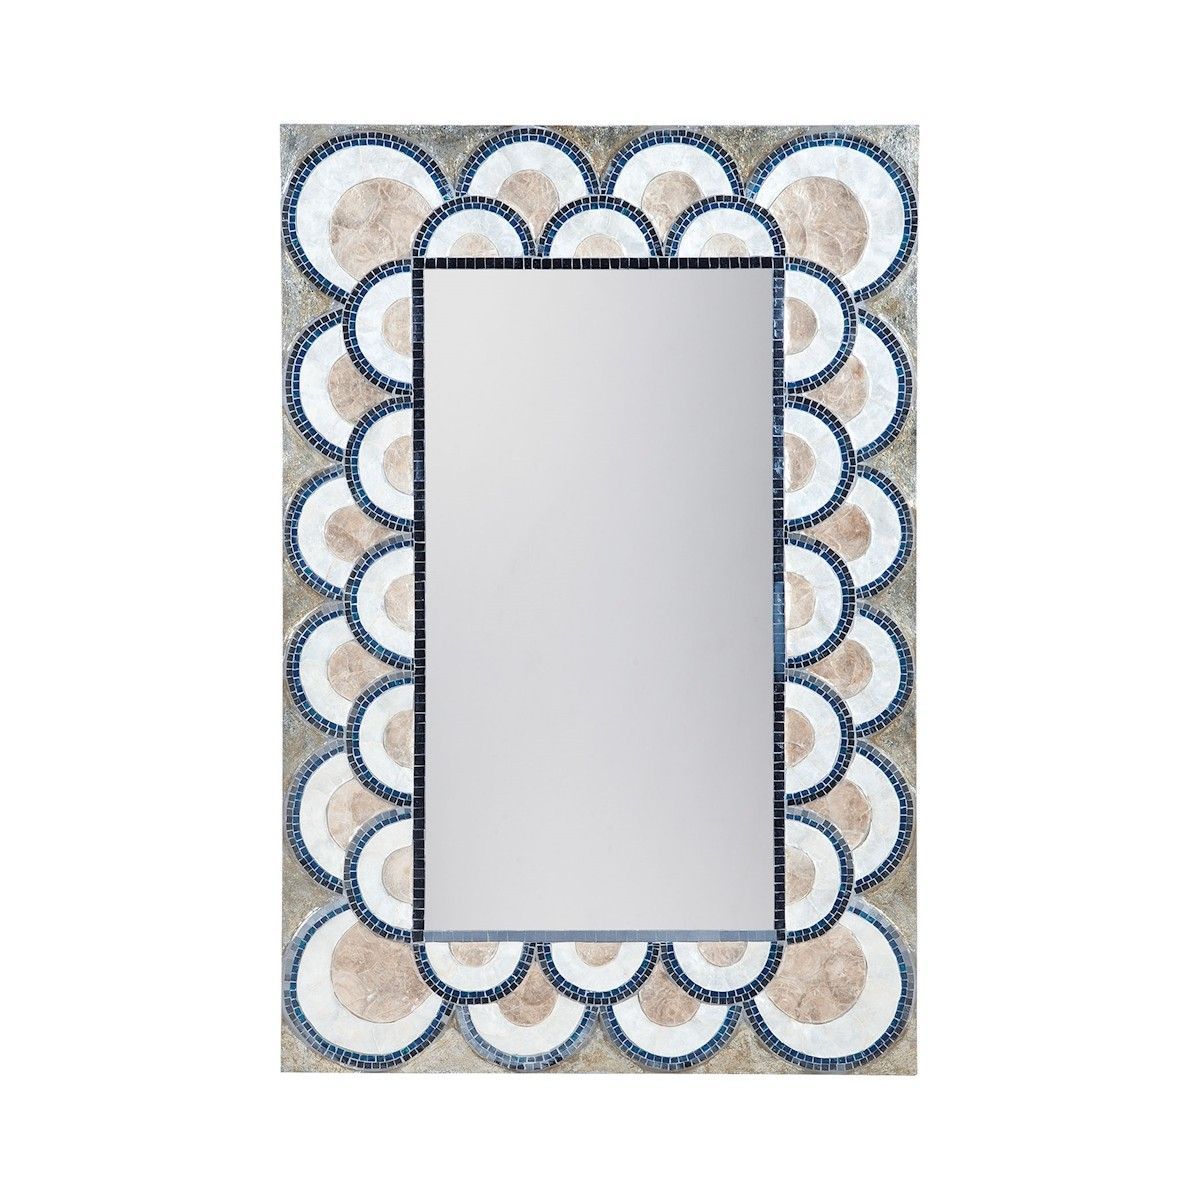 Dimond Home 7163 071 Art Deco Capiz Shell And Glass Mosaic Mirror Within Shell Mosaic Wall Mirrors (View 11 of 15)